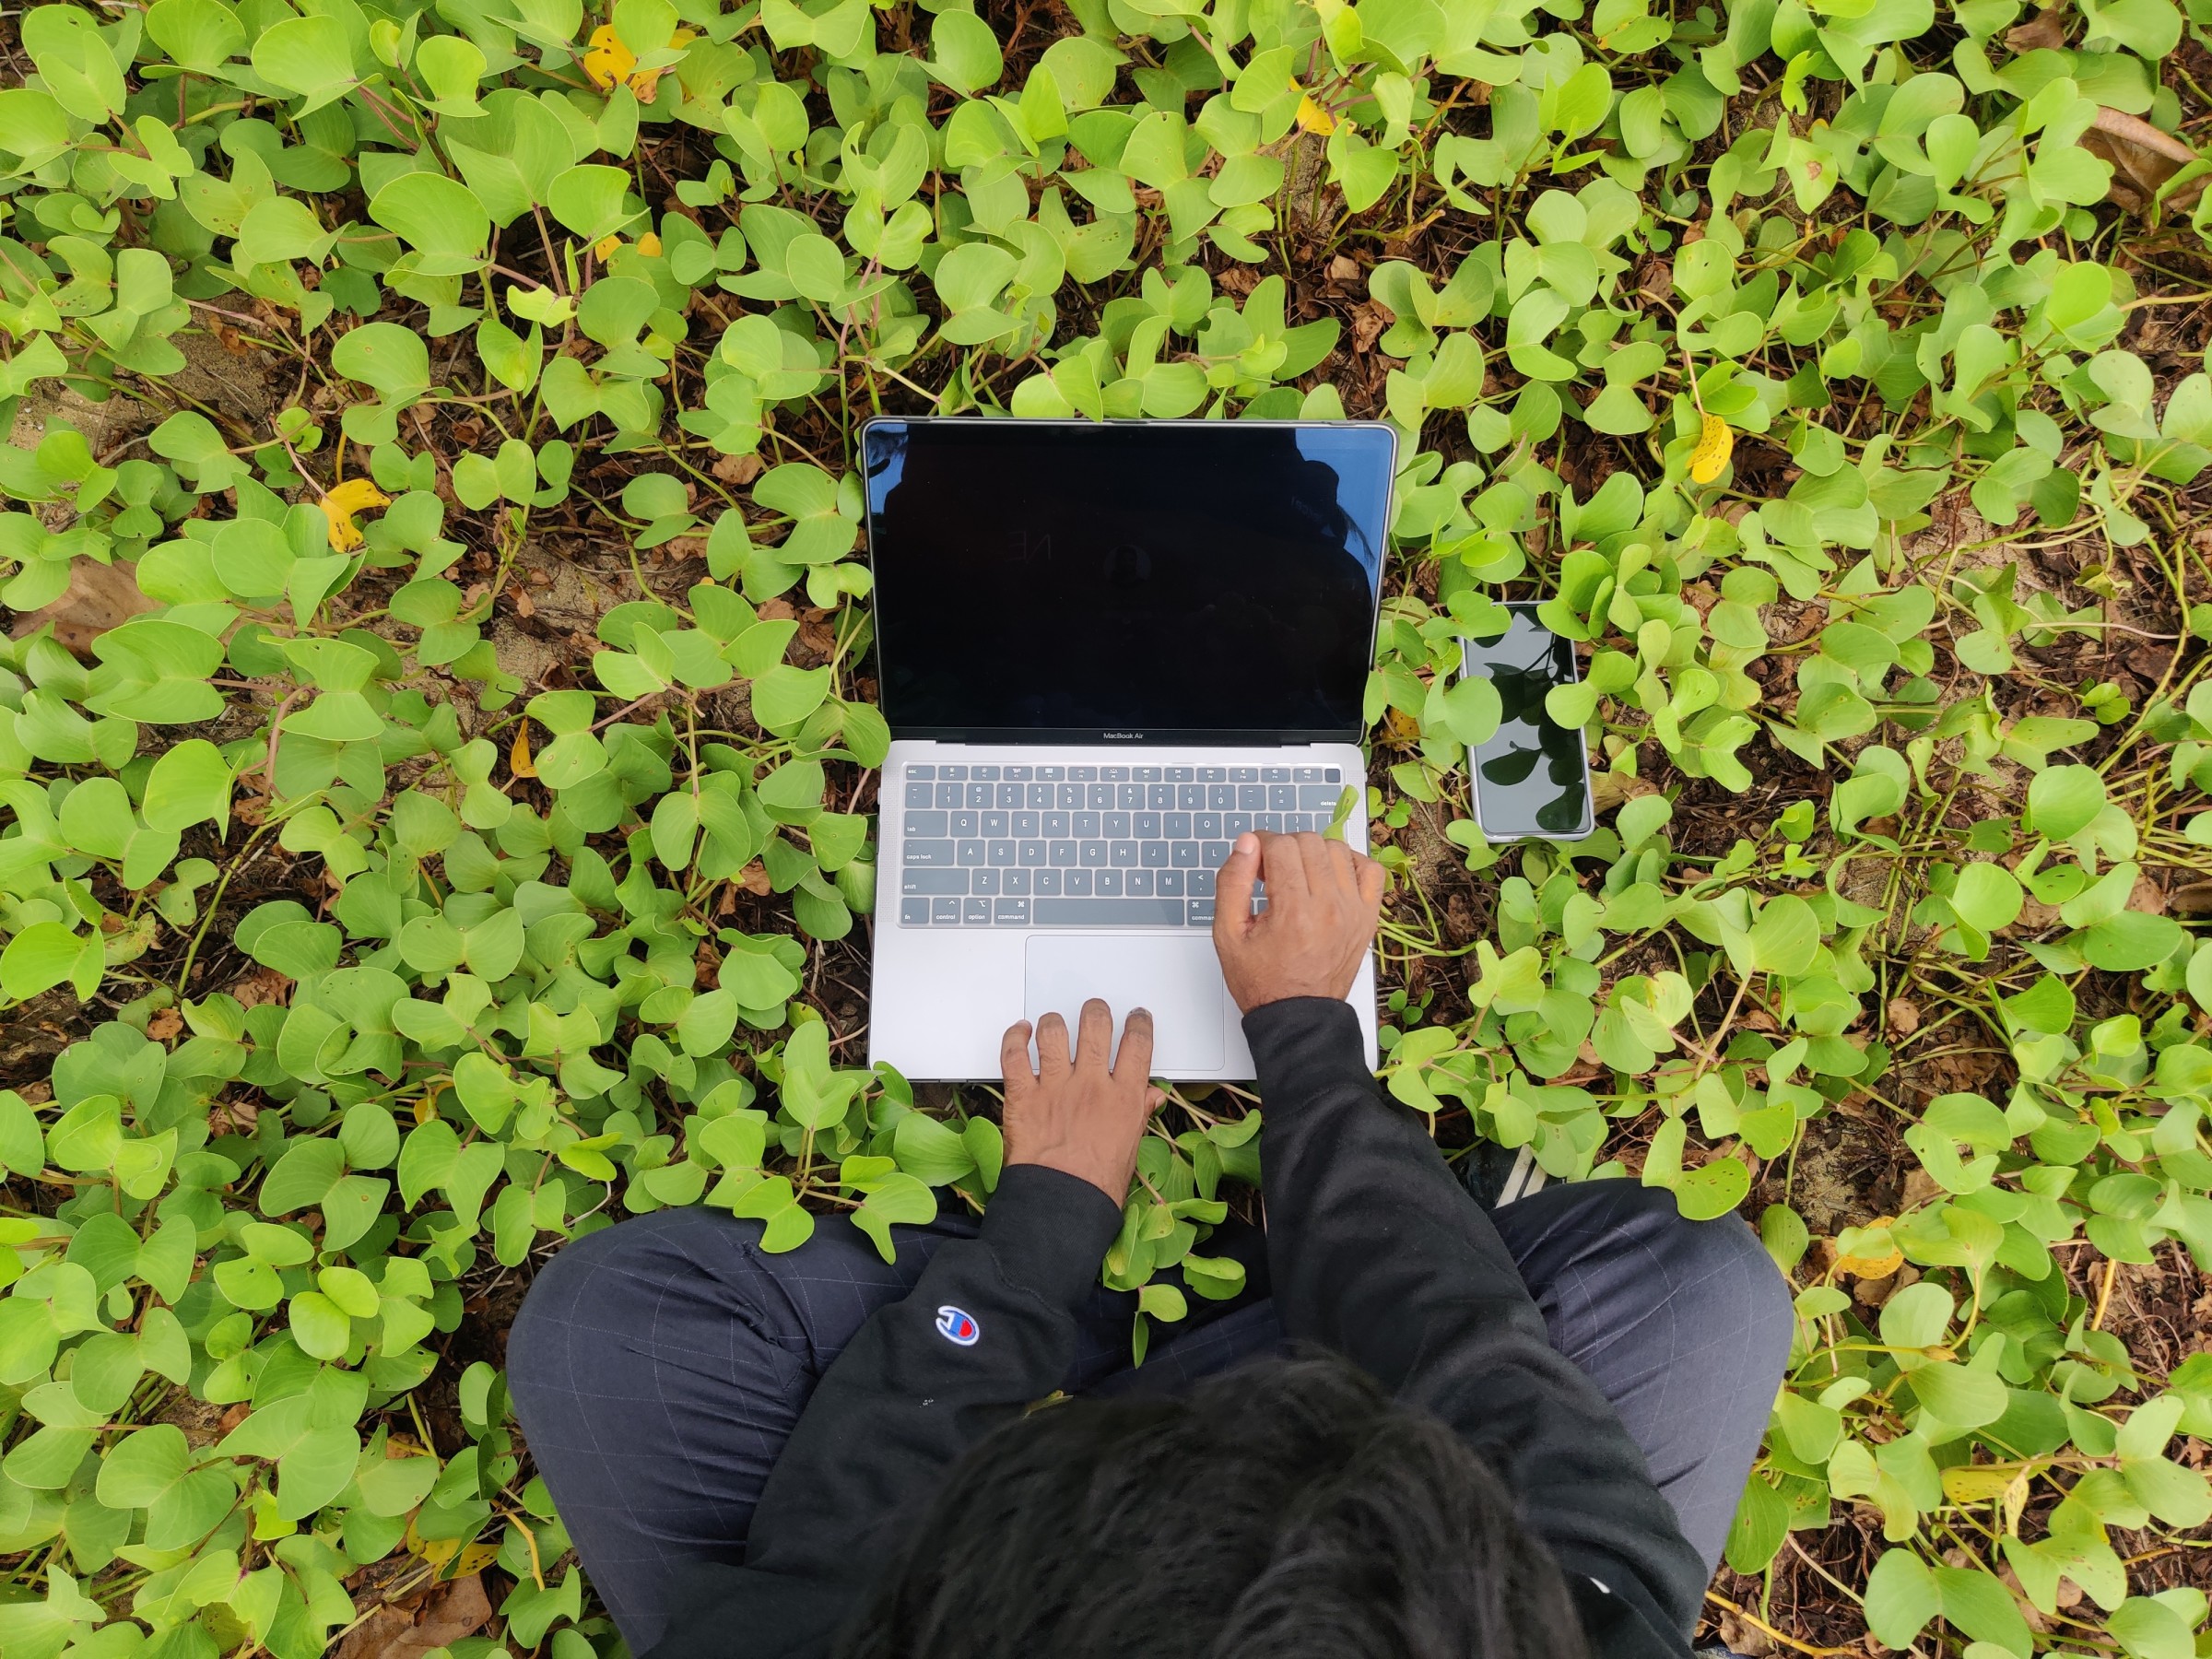 Author Liyas working on his laptop in a field of greenery